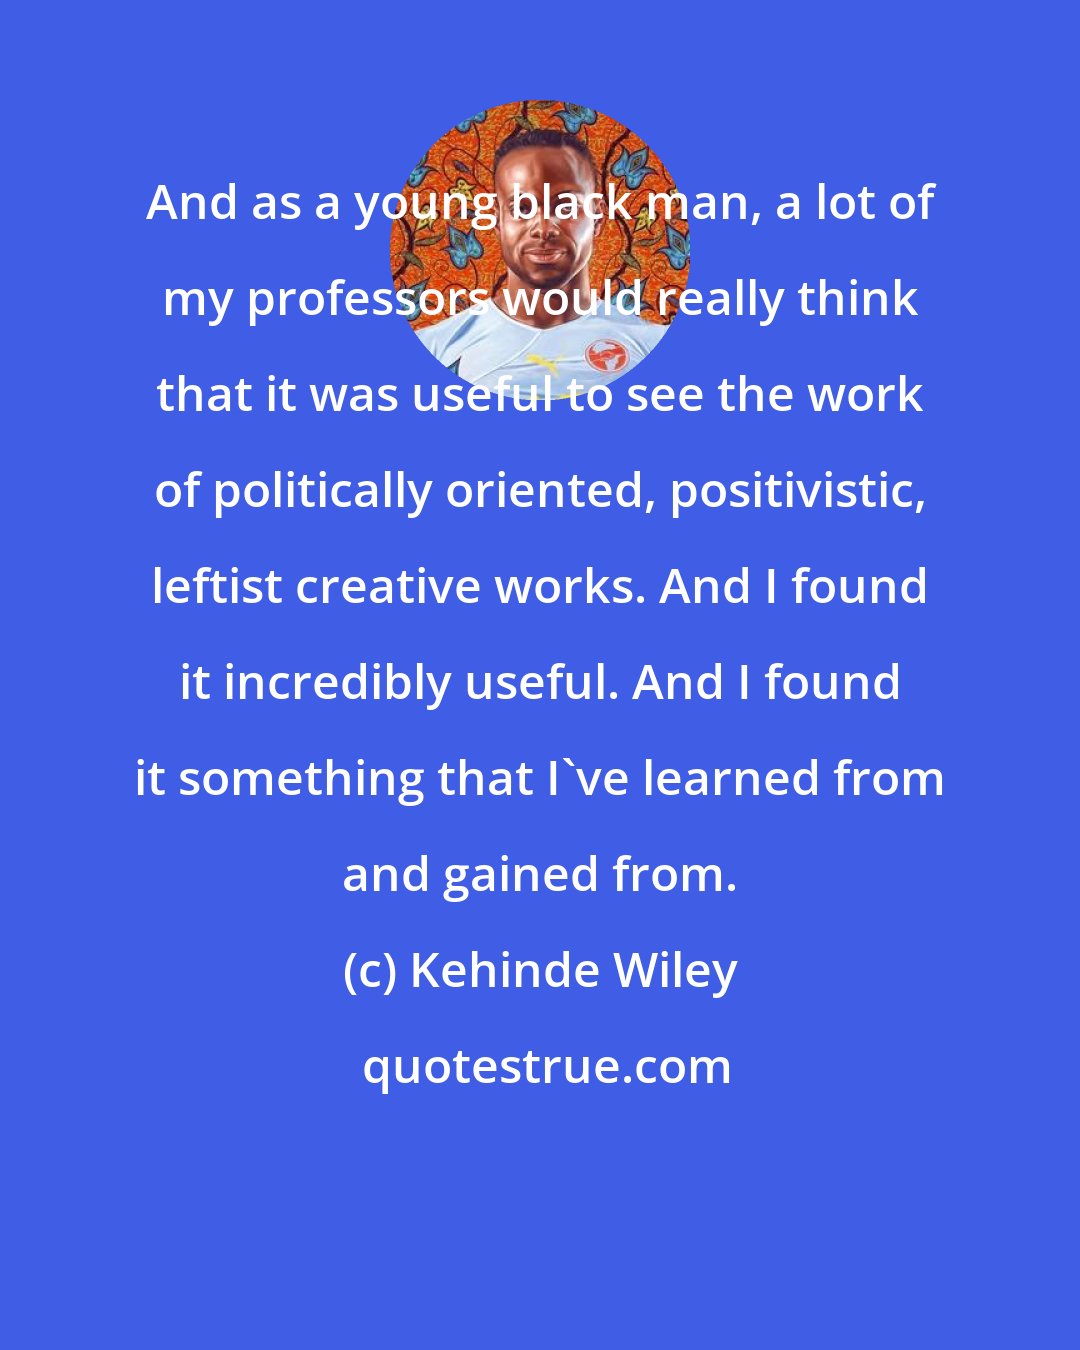 Kehinde Wiley: And as a young black man, a lot of my professors would really think that it was useful to see the work of politically oriented, positivistic, leftist creative works. And I found it incredibly useful. And I found it something that I've learned from and gained from.